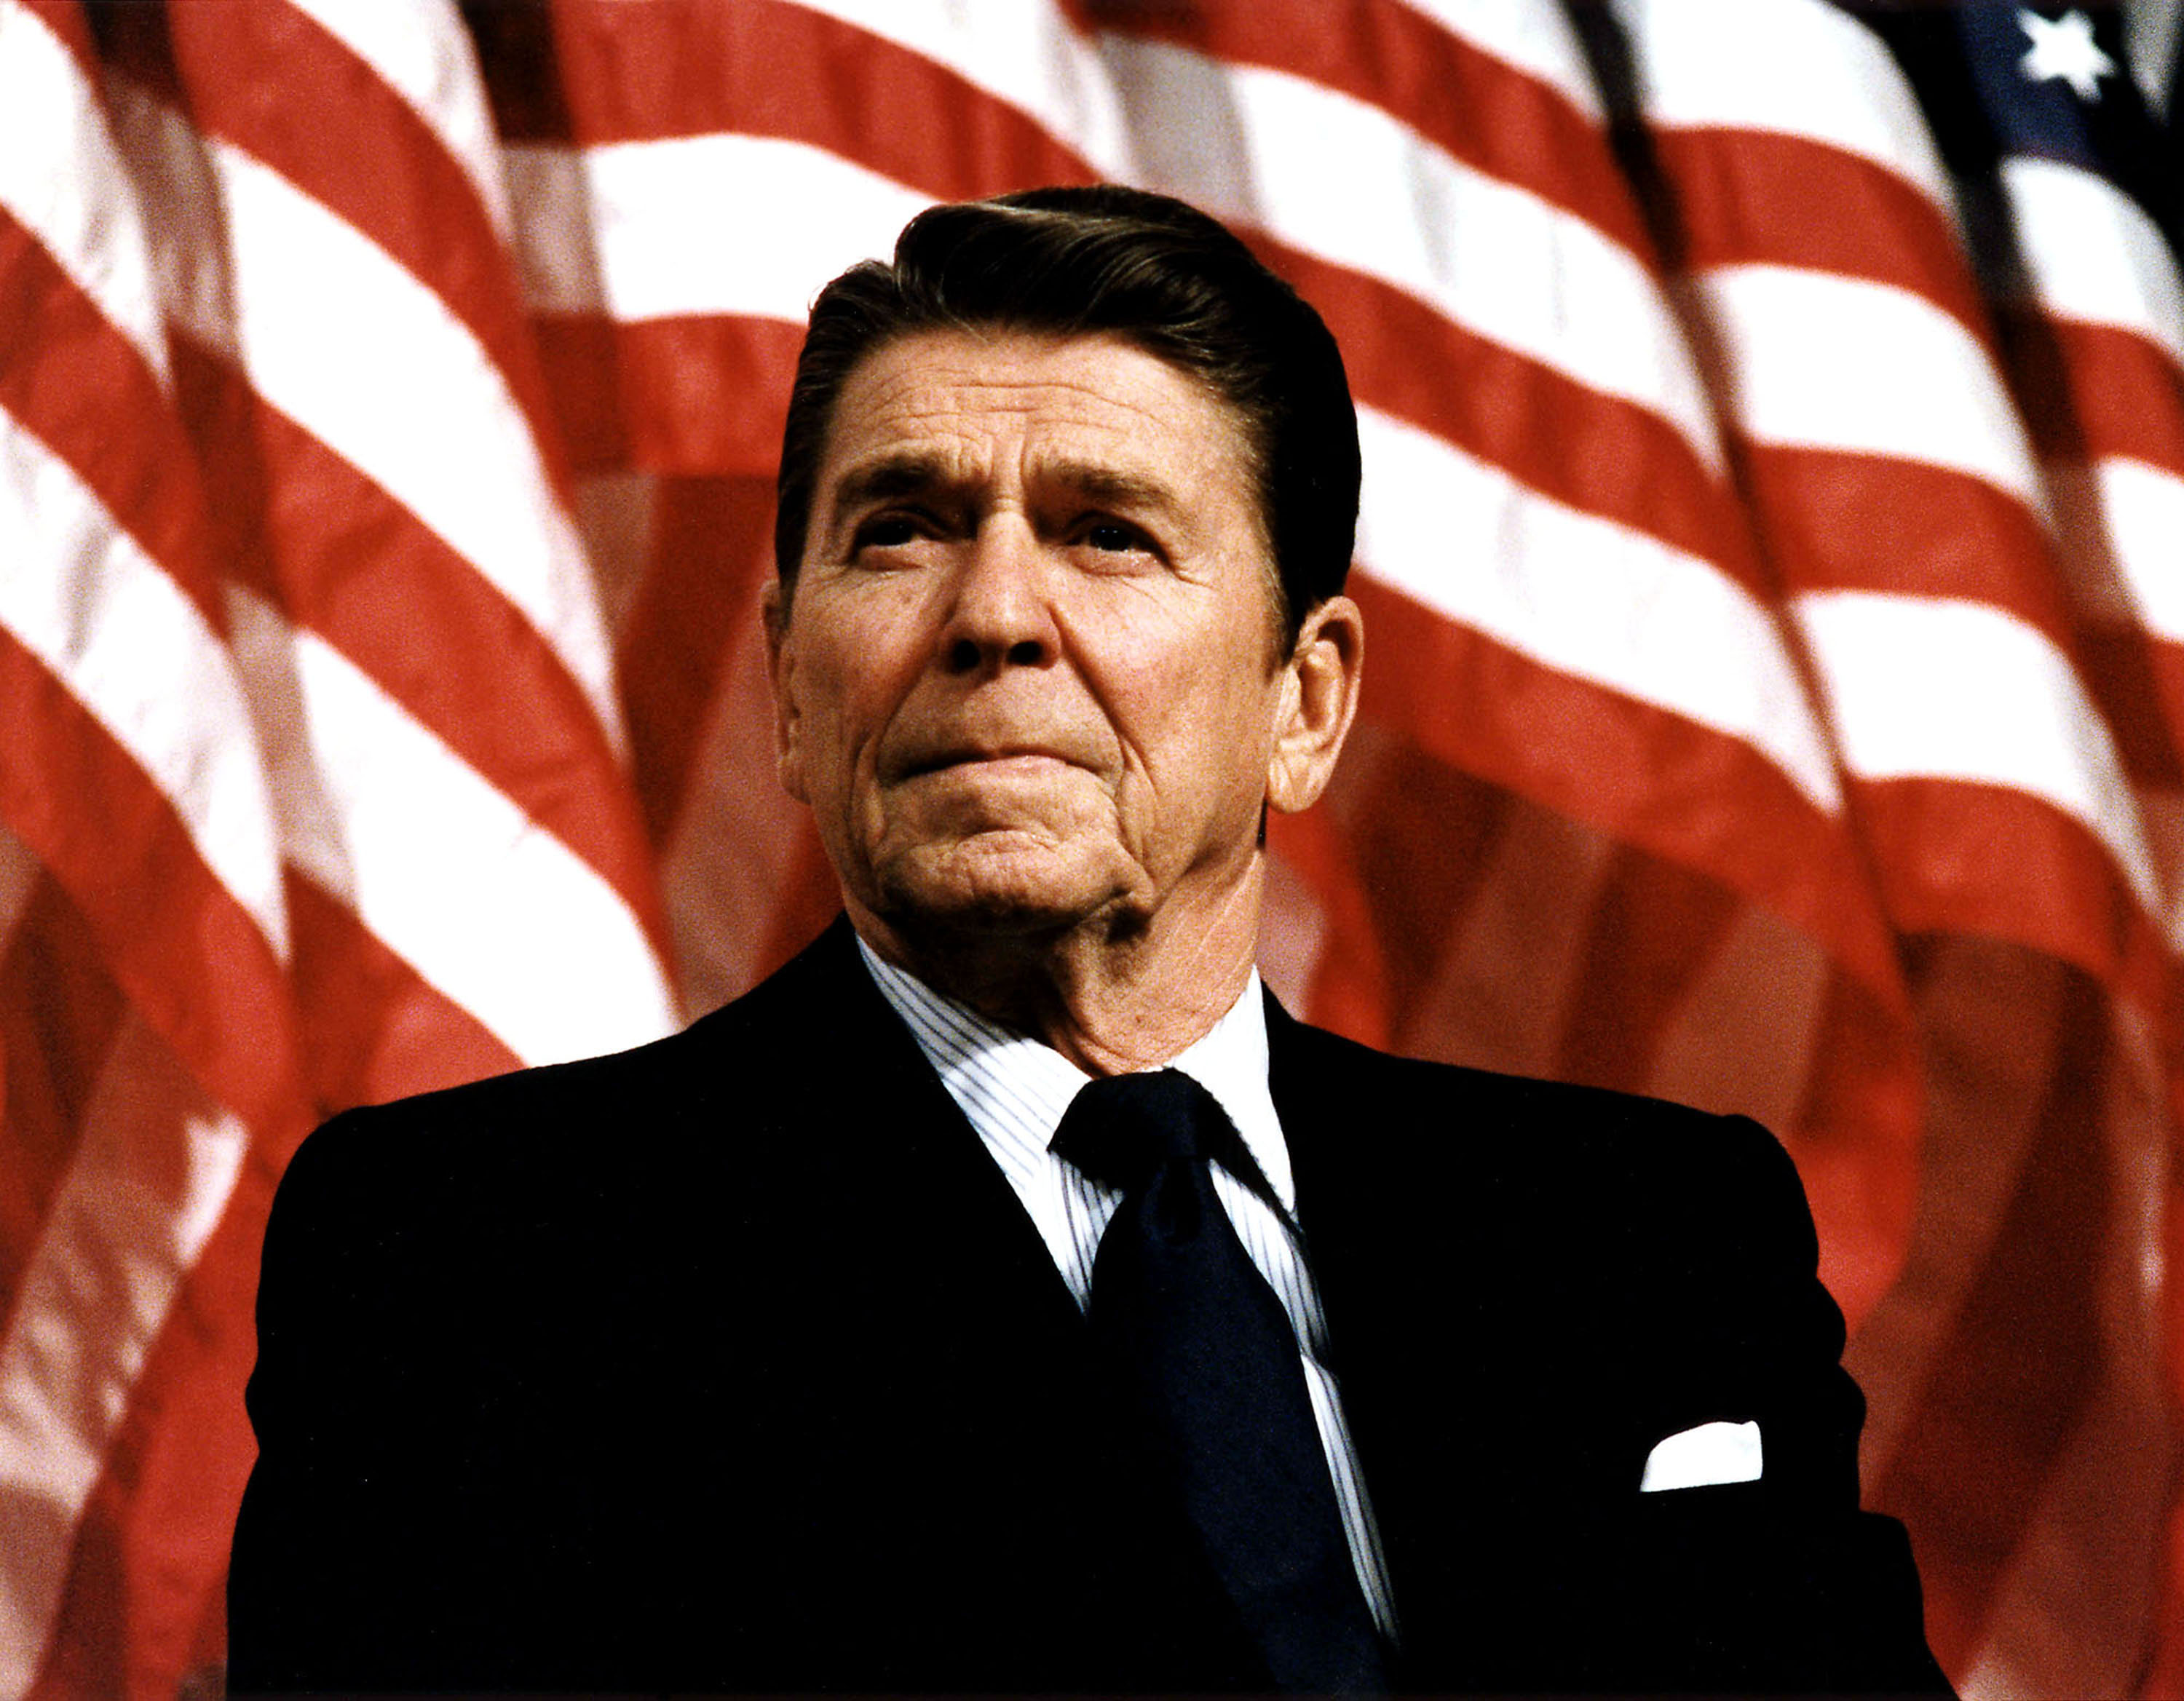 Ronald Reagan in front of flags